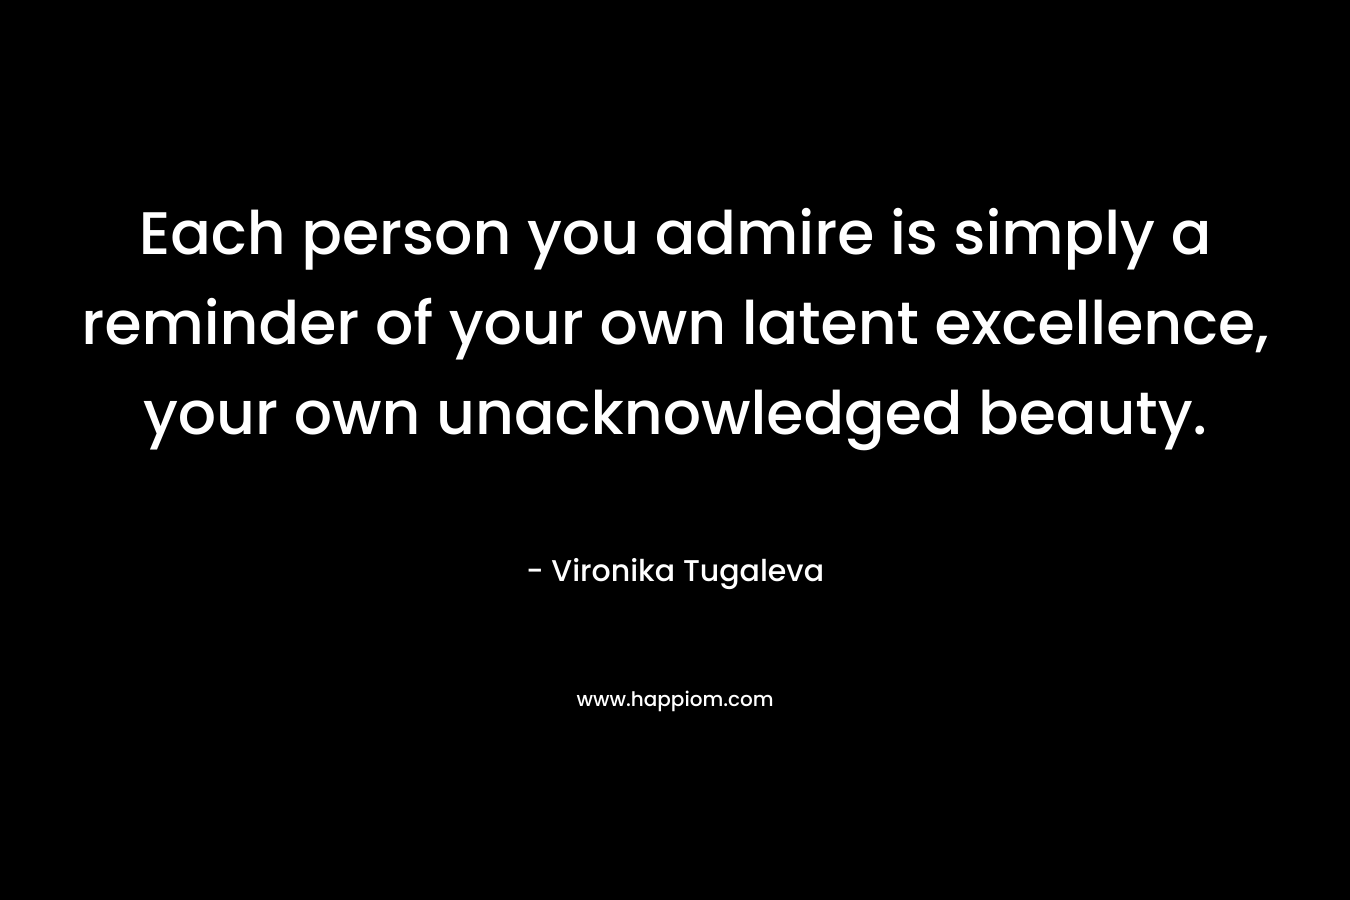 Each person you admire is simply a reminder of your own latent excellence, your own unacknowledged beauty. – Vironika Tugaleva